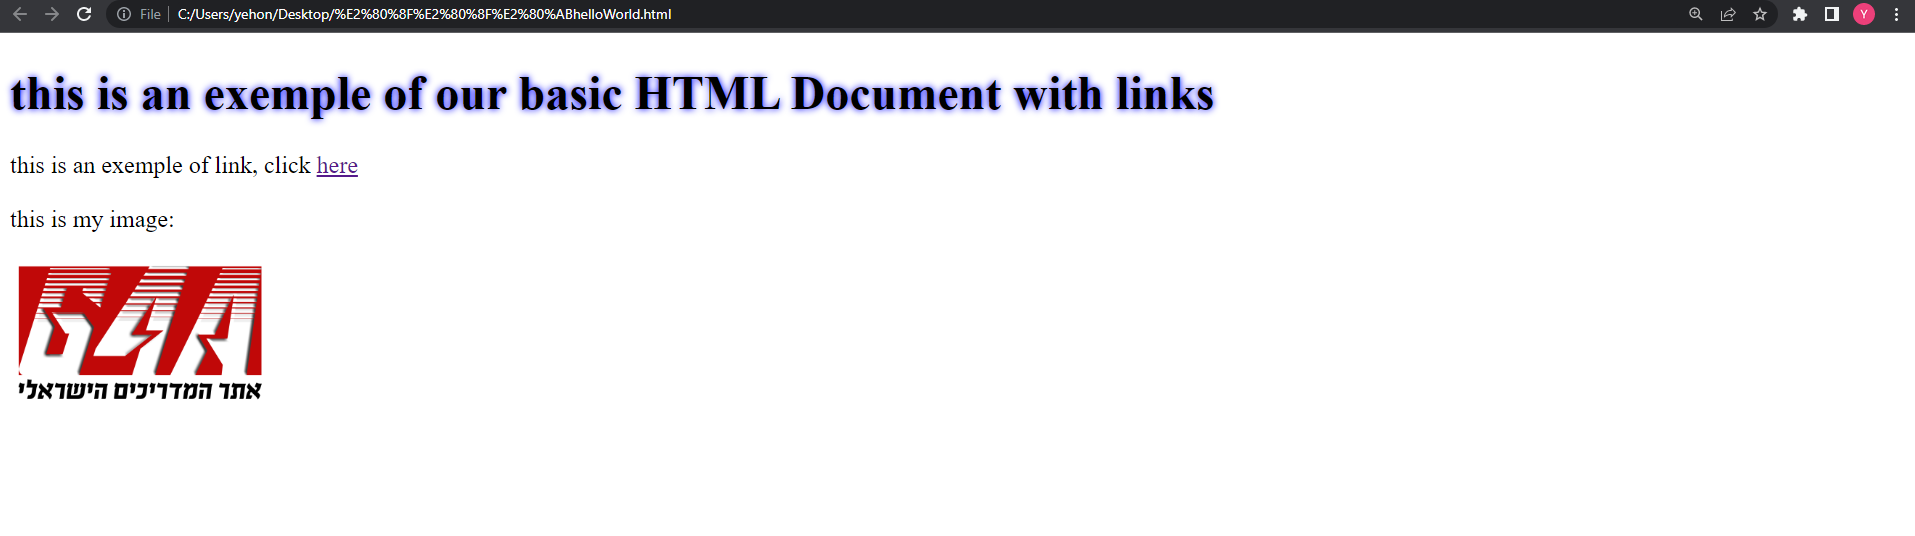 CSS in HTML - text shadow